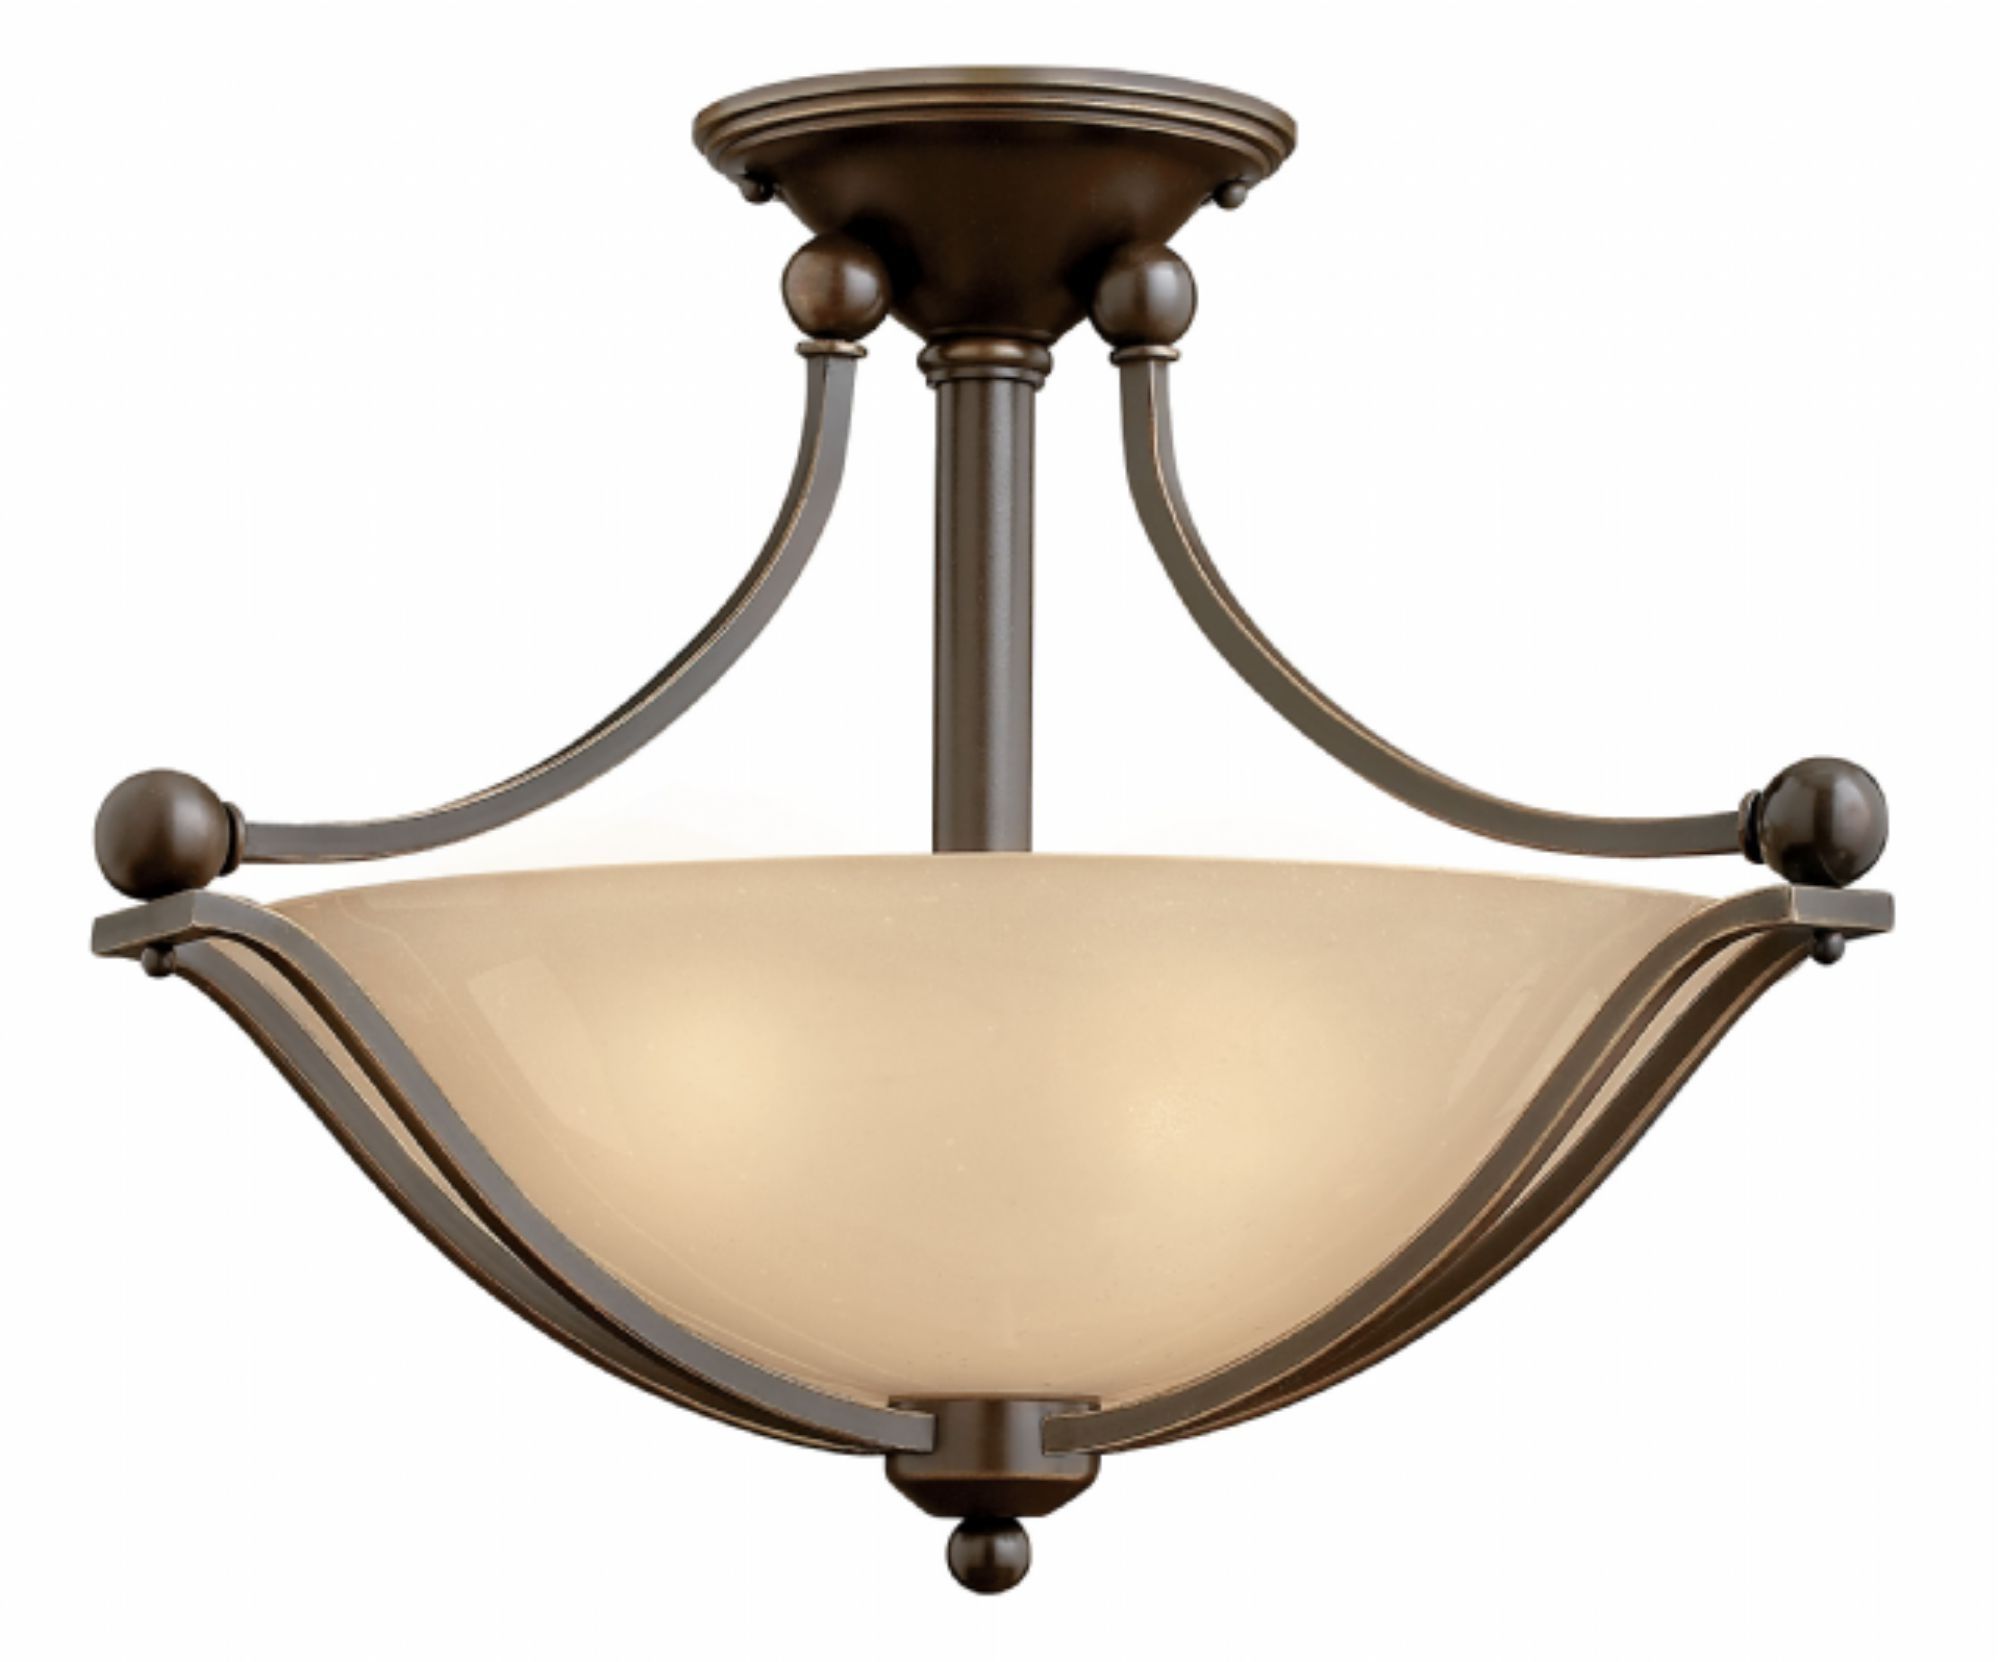 Olde Bronze Bolla > Interior Ceiling Mount Throughout Best And Newest Contemporary Hinkley Lighting (View 19 of 20)